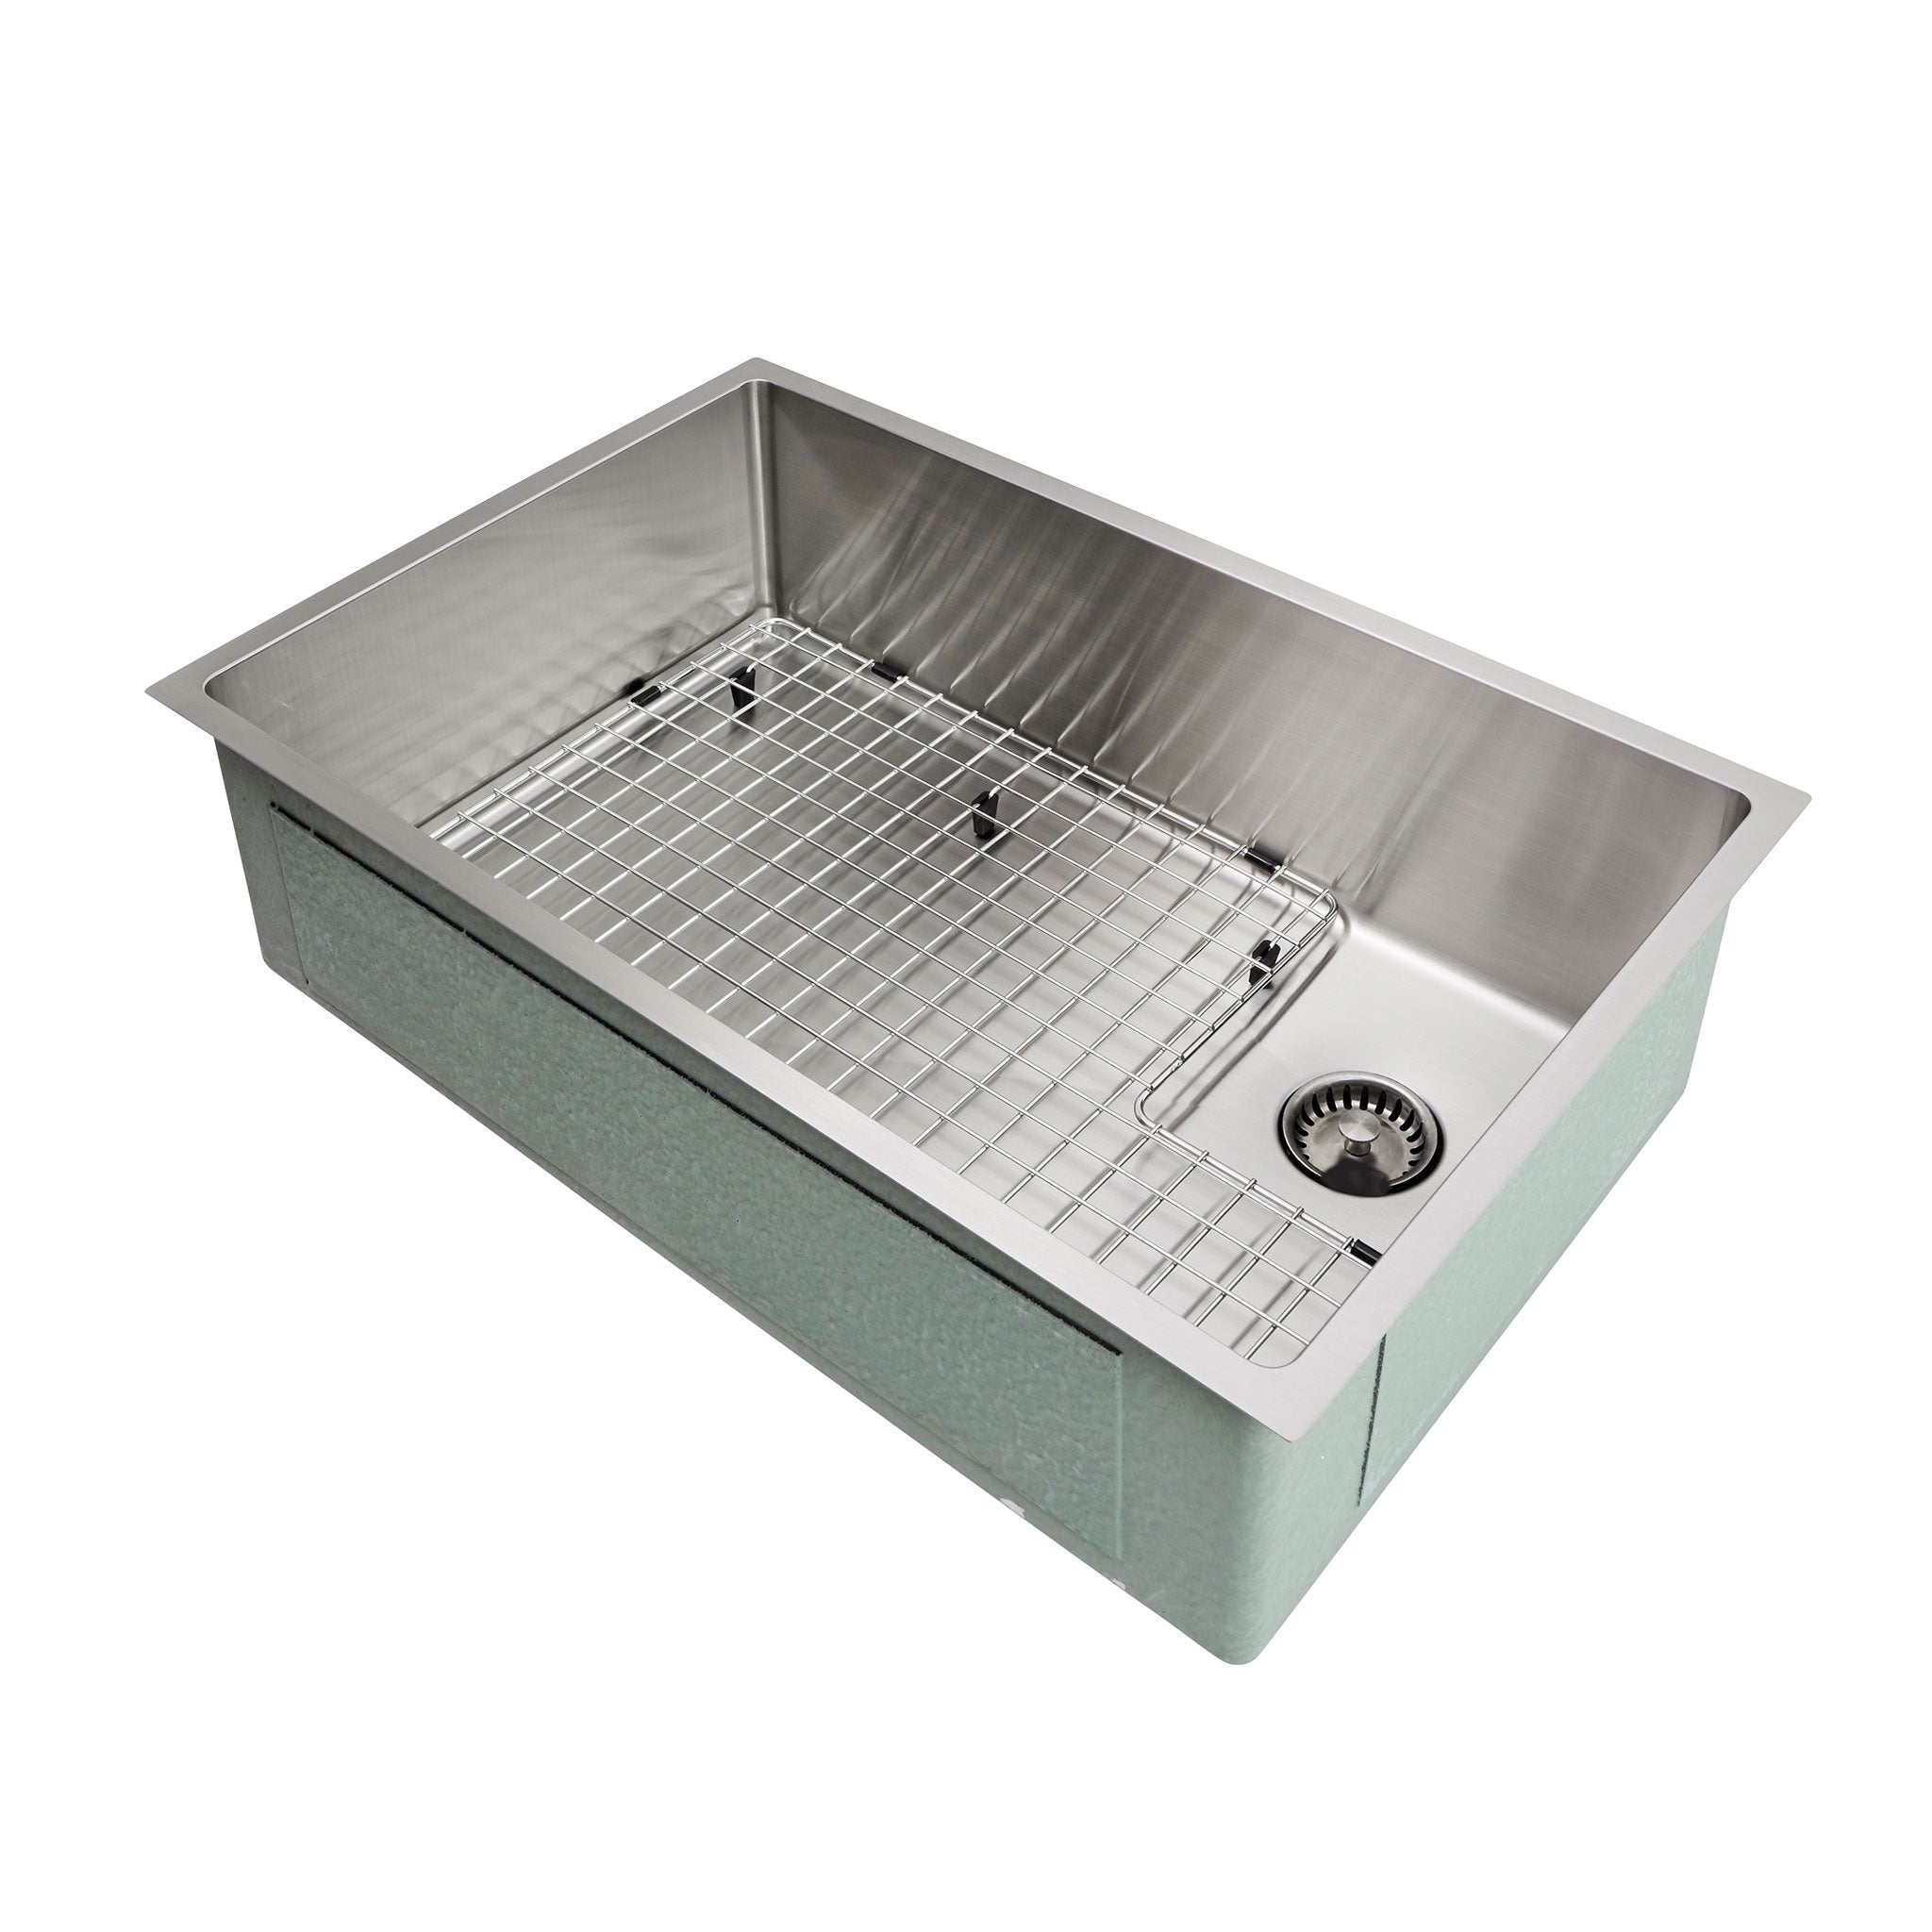 28" classic, undermount kitchen sink with an offset drain of the seamless design.